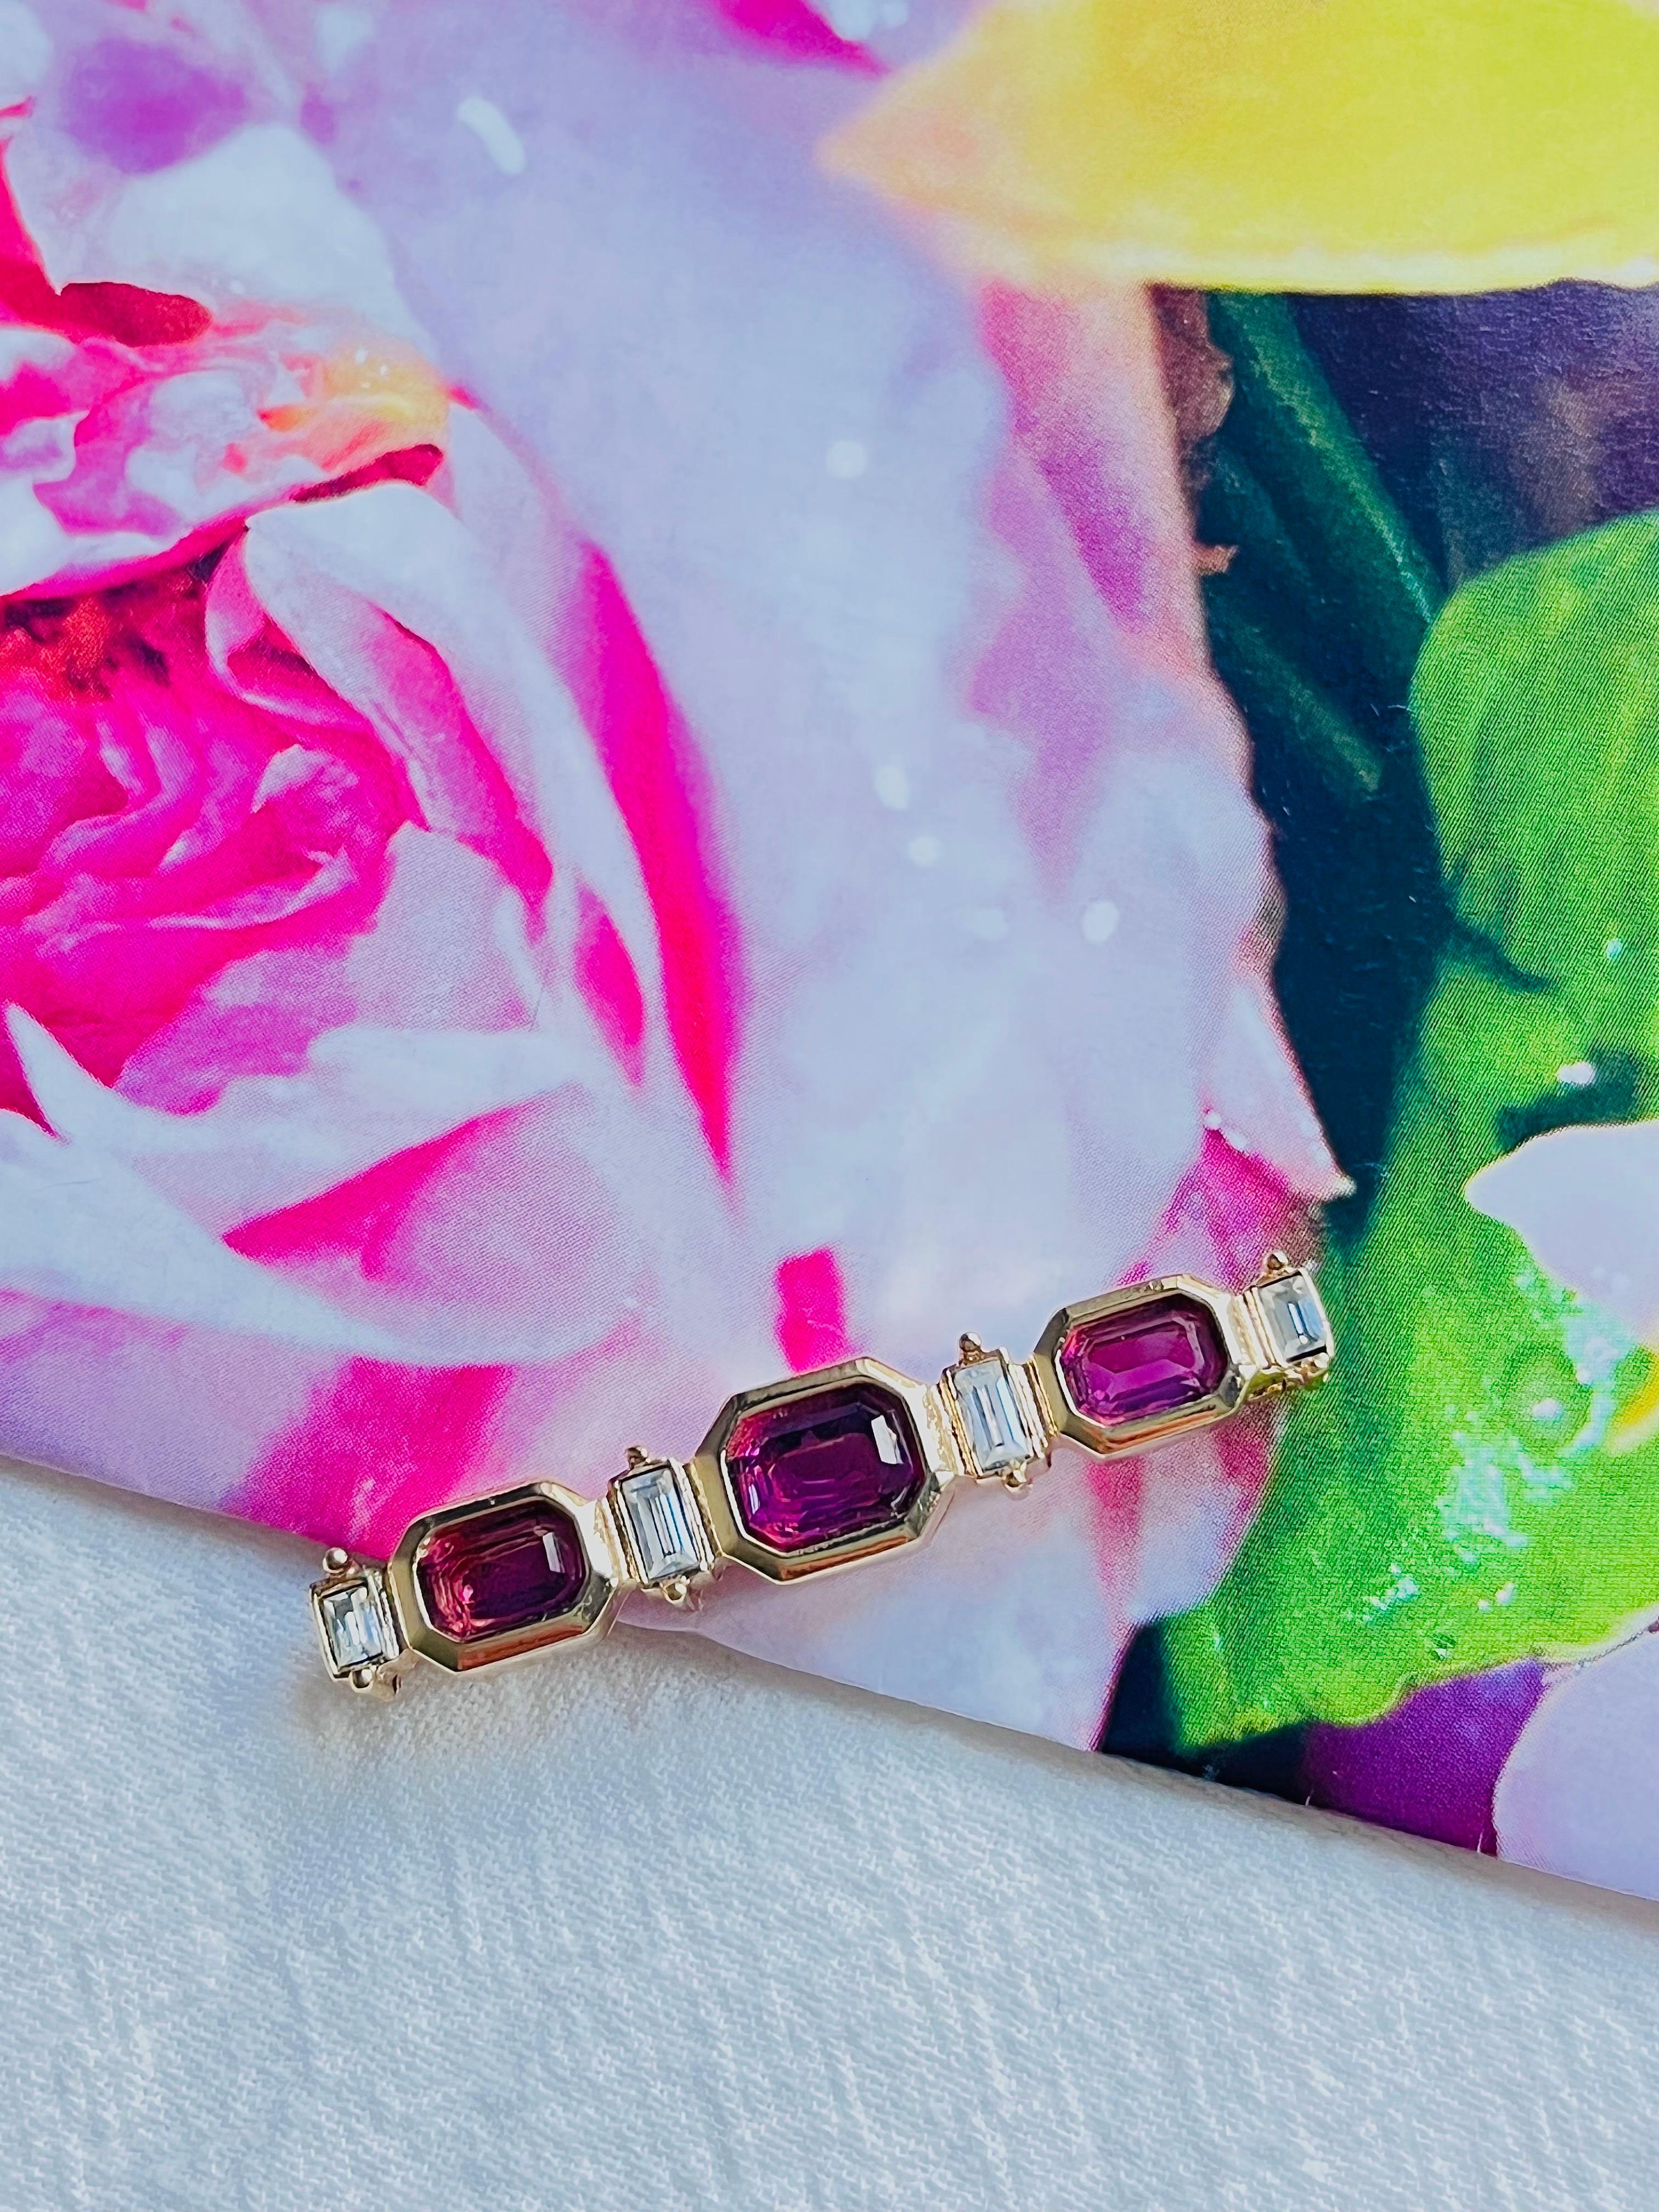 Christian Dior Vintage 1980s Trio Amethyst Octagon Rectangle Crystals Long Bar Brooch, Gold Tone

Very good condition. 100% Genuine. Rare to find.

Material: Gold plated metal, Rhinestones.

Size: 4.2 cm x 0.8 cm.

Weight: 5.0 g.

_ _ _

Great for